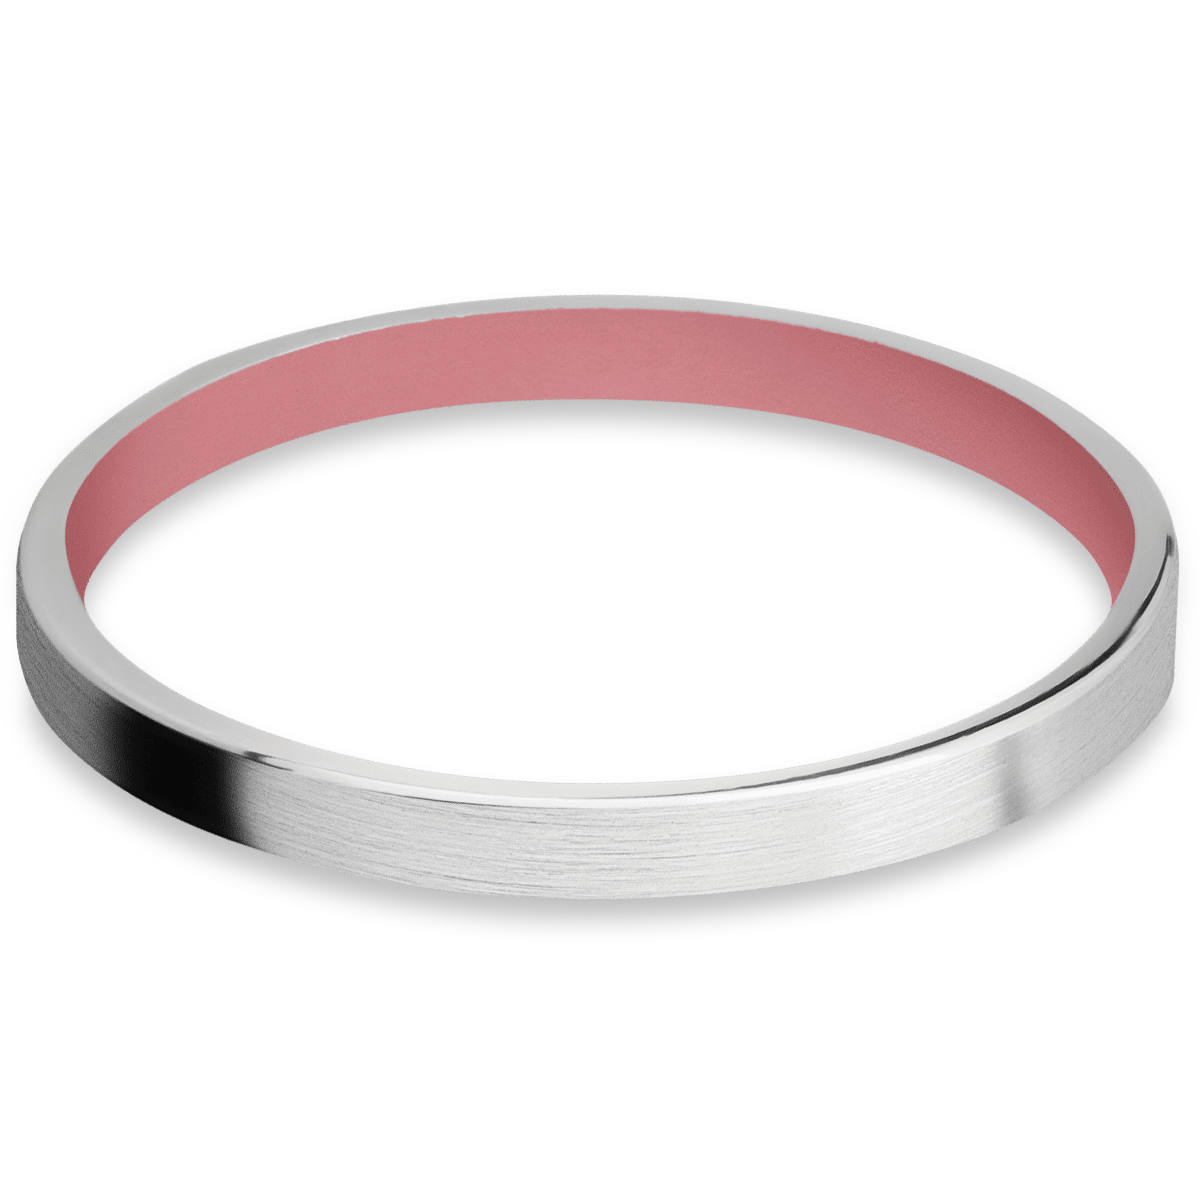 2mm wide flat platinum engagement ring featuring a bazooka pink cerakote sleeve.